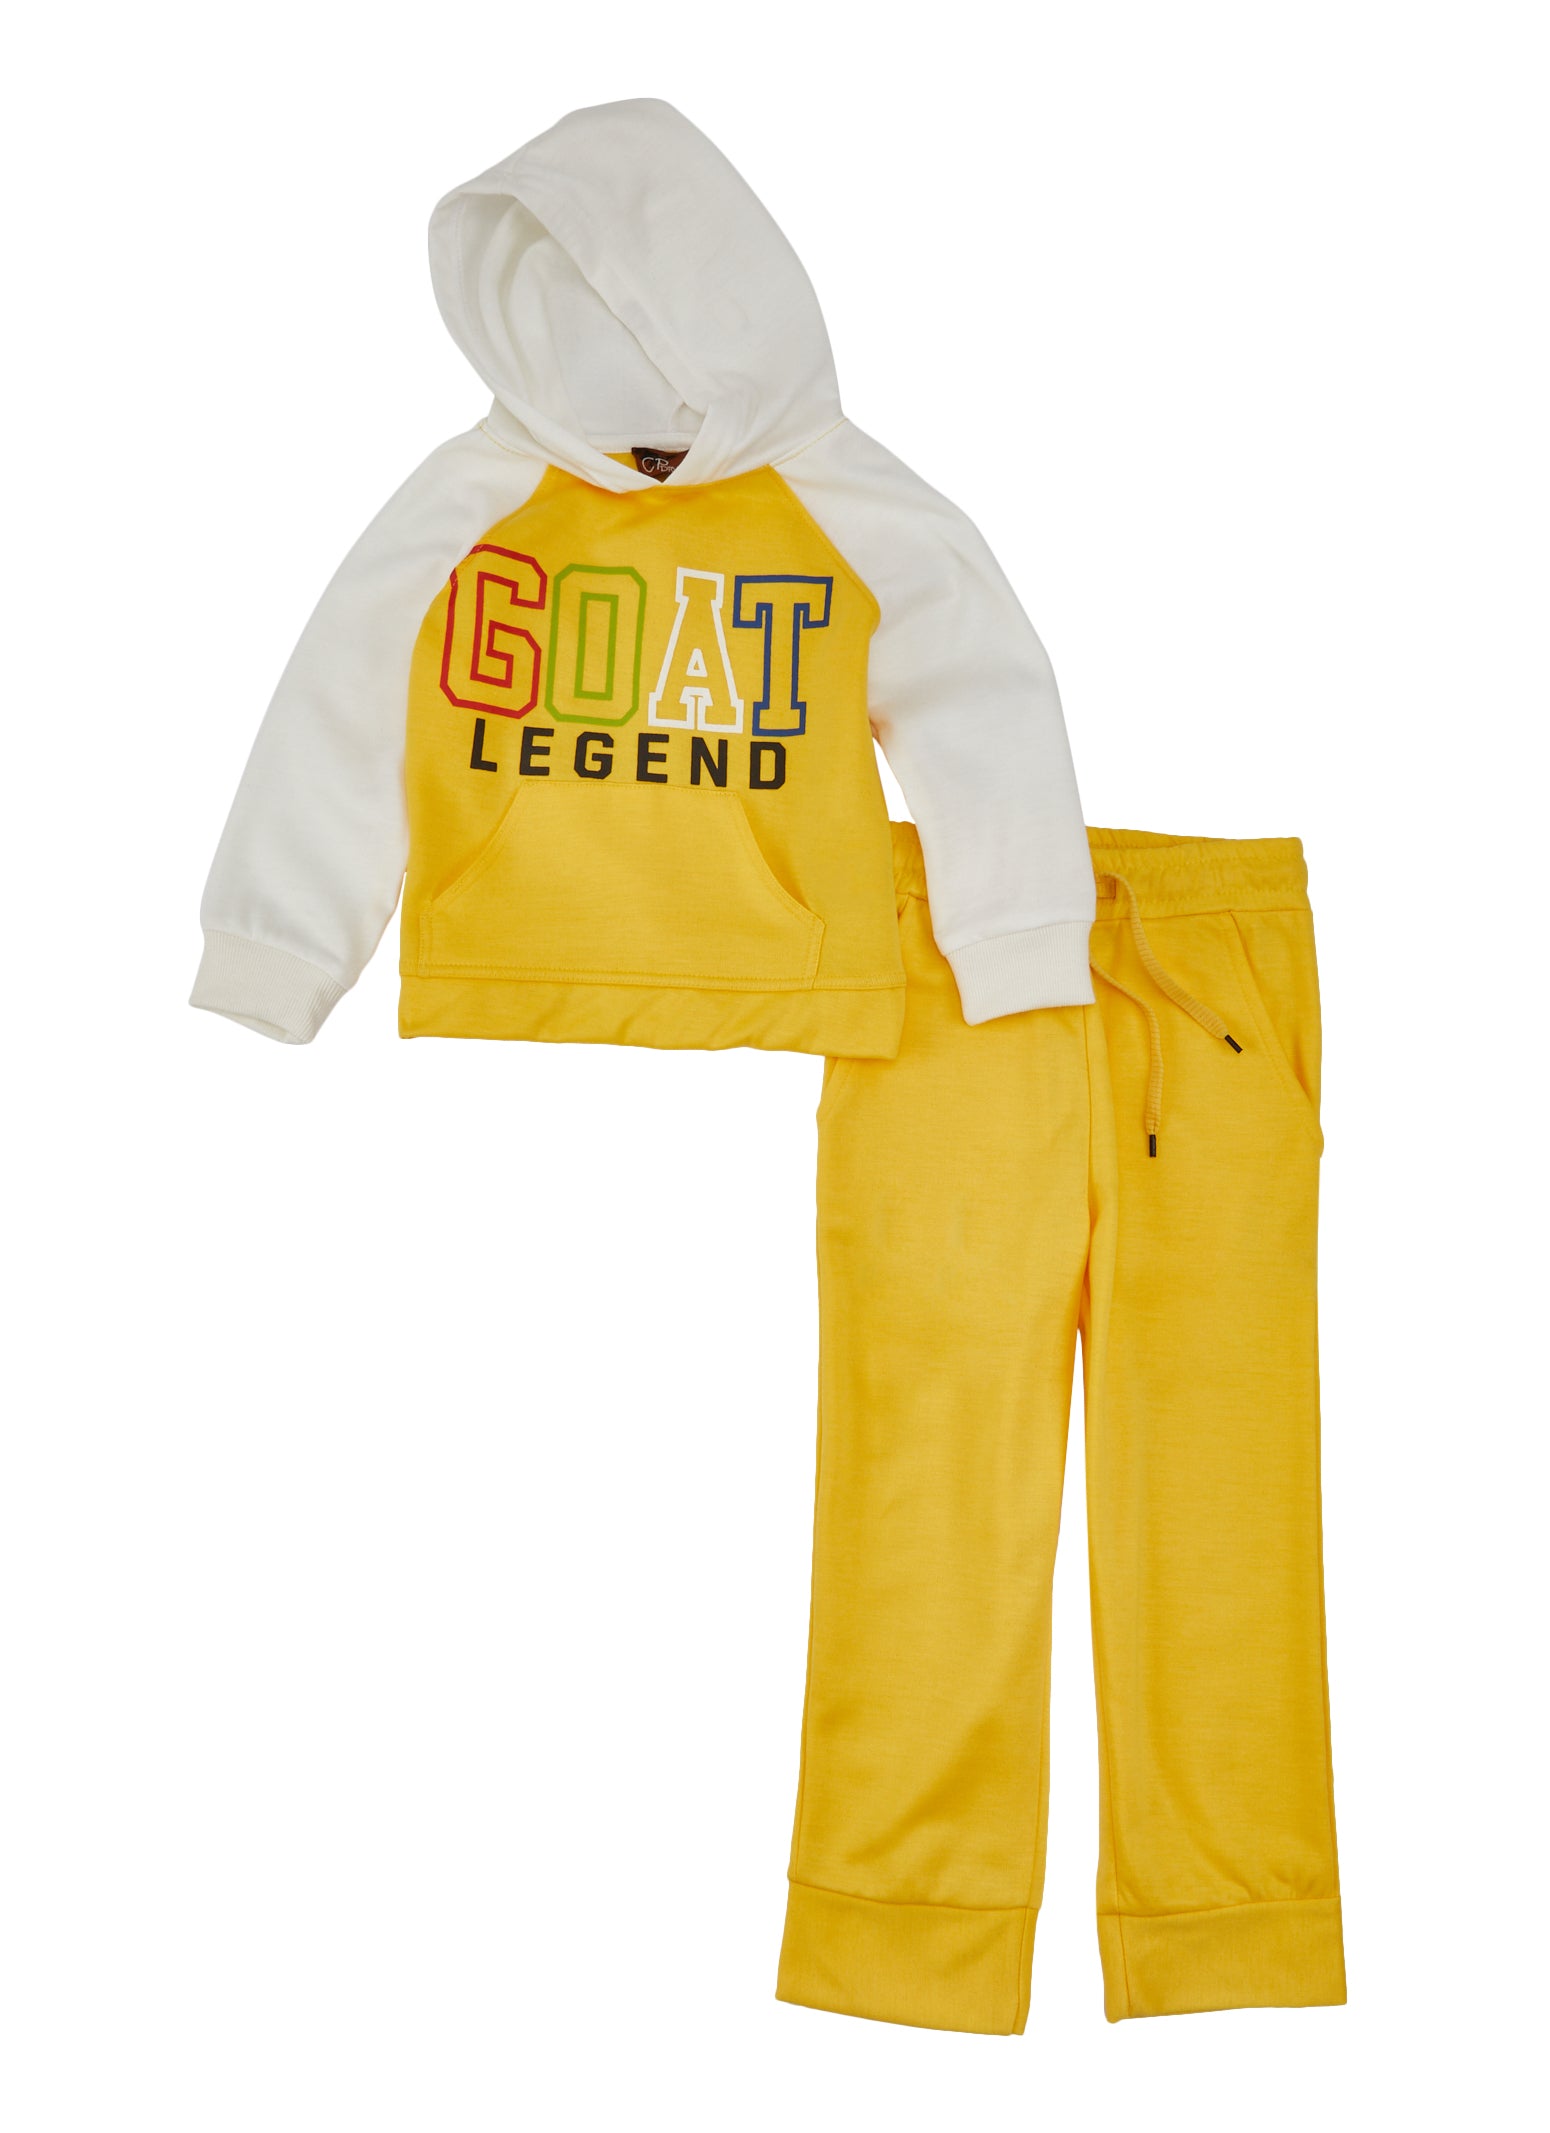 Little Boys Color Block GOAT Legend Pullover Hoodie and Joggers, Yellow, Size 4